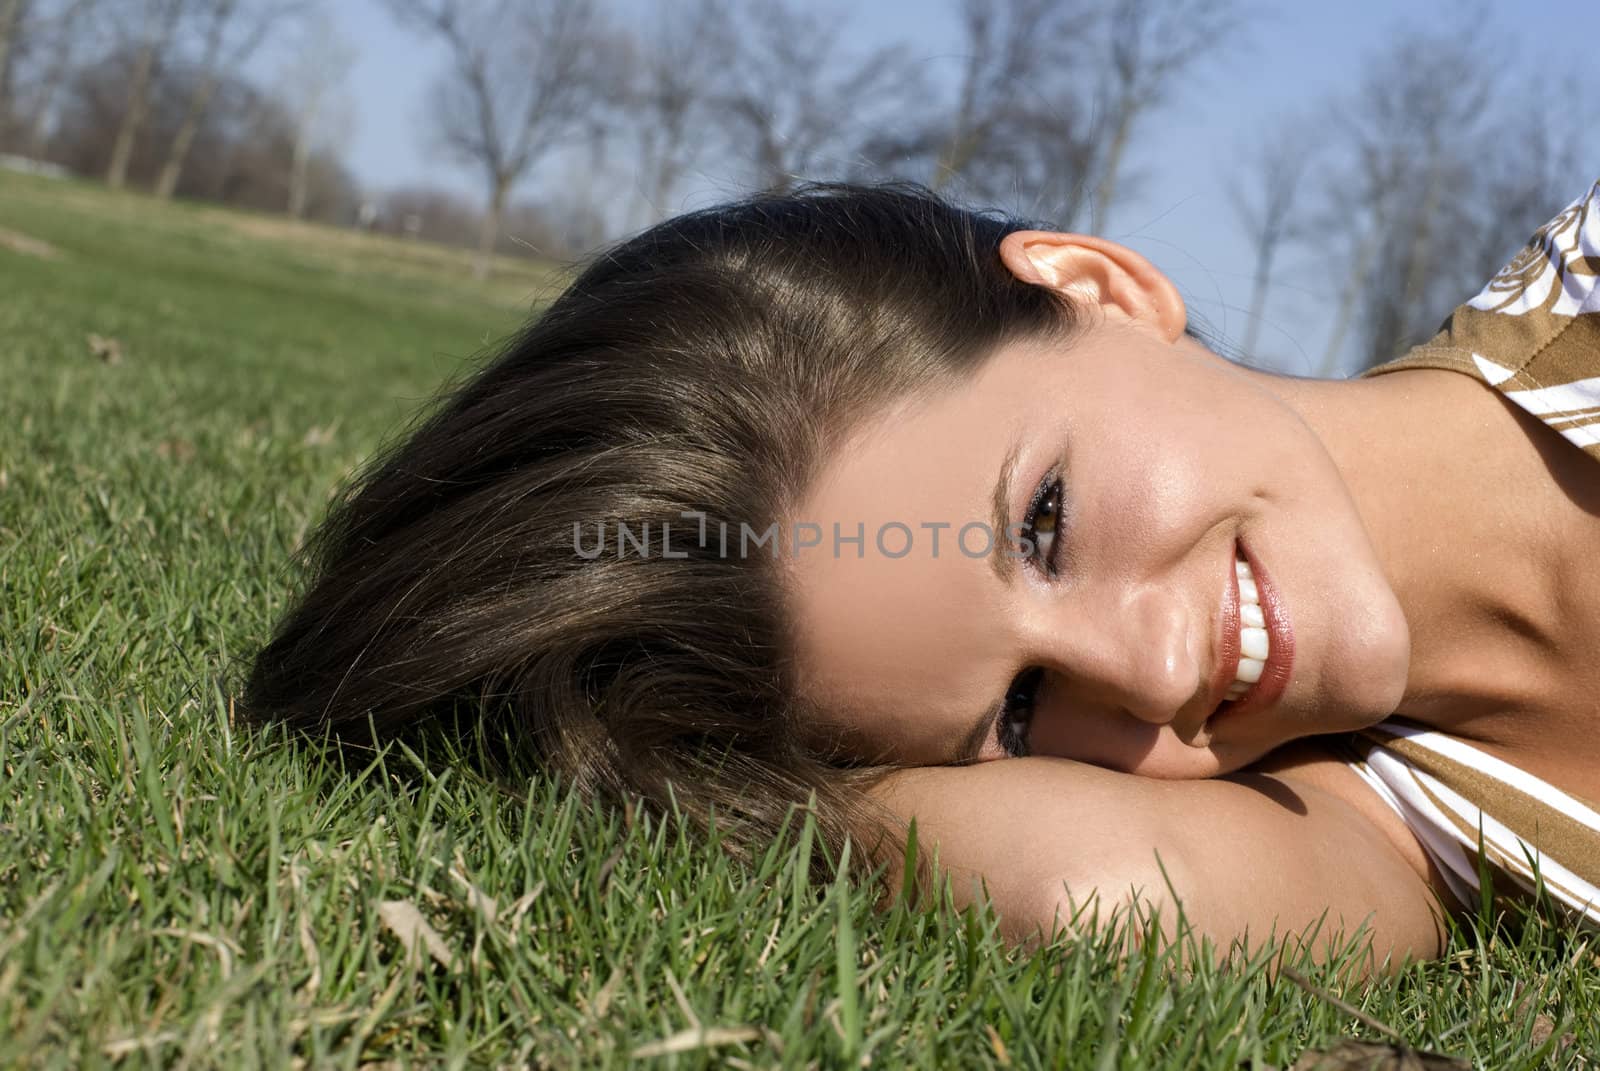 A beautiful and cute model laying on the grass.